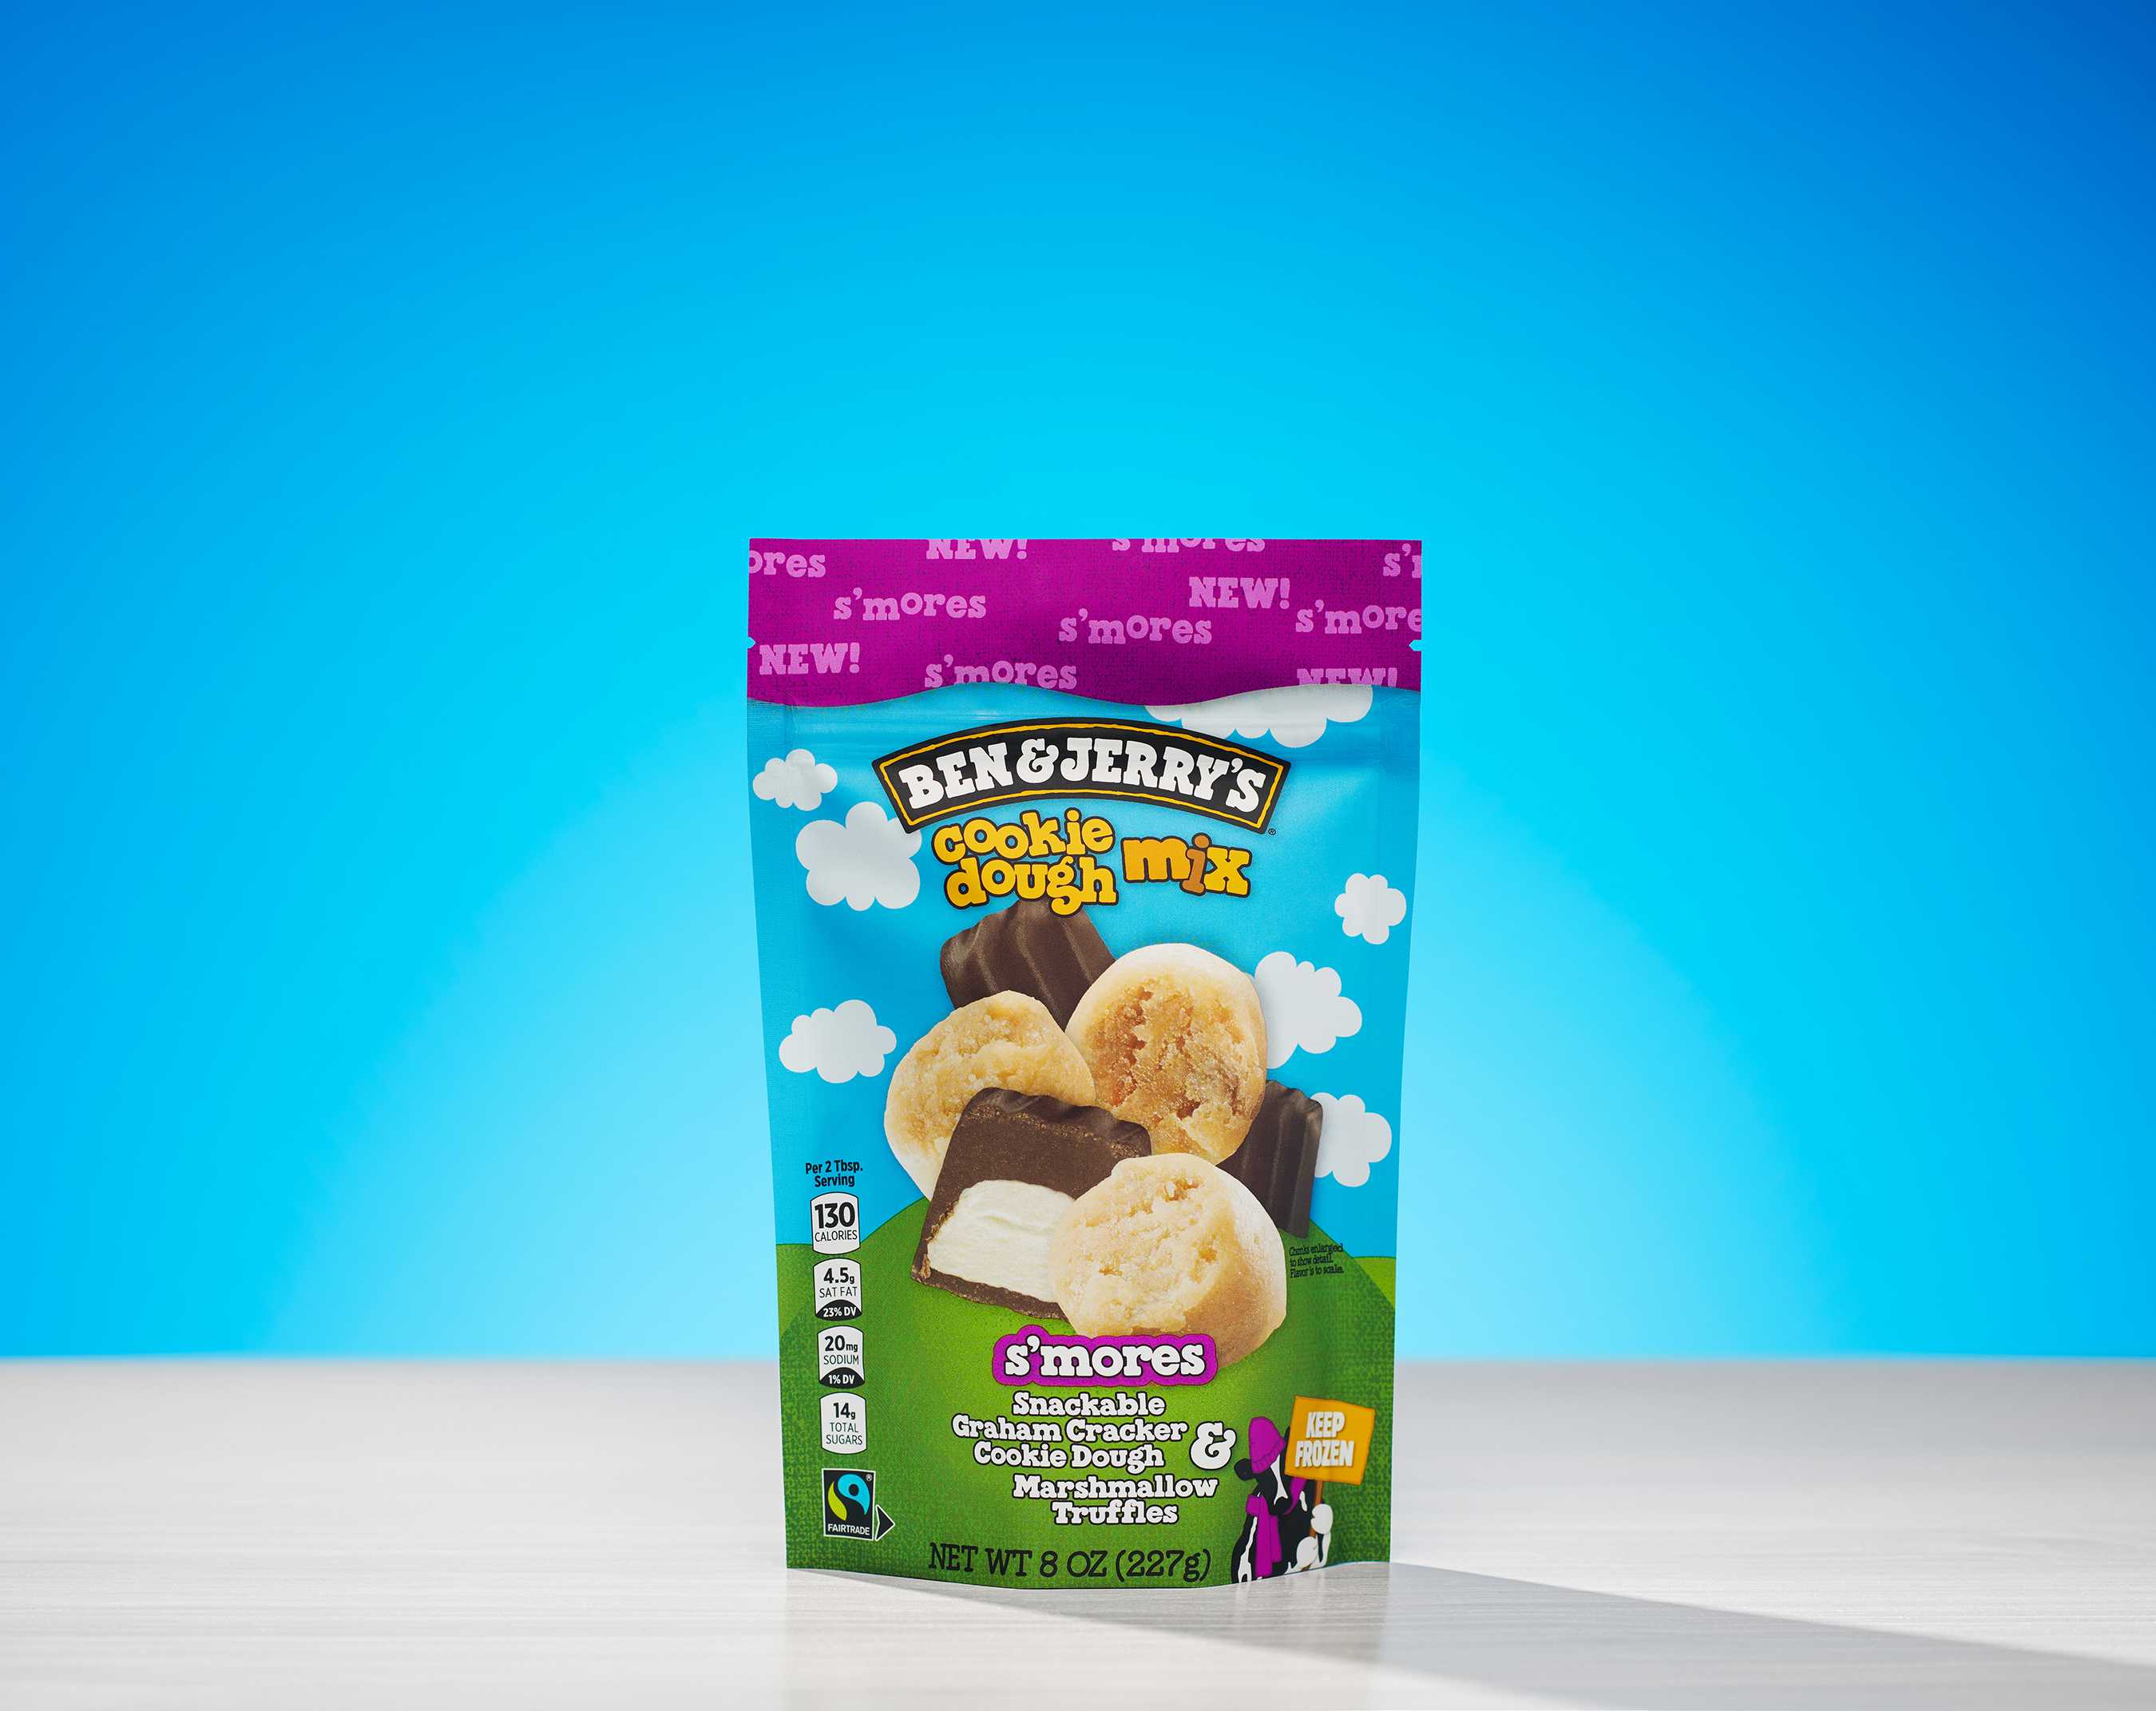 The new S’mores Cookie Dough Mix unveiled by Ben & Jerry’s features snackable graham cracker cookie dough with marshmallow truffles.